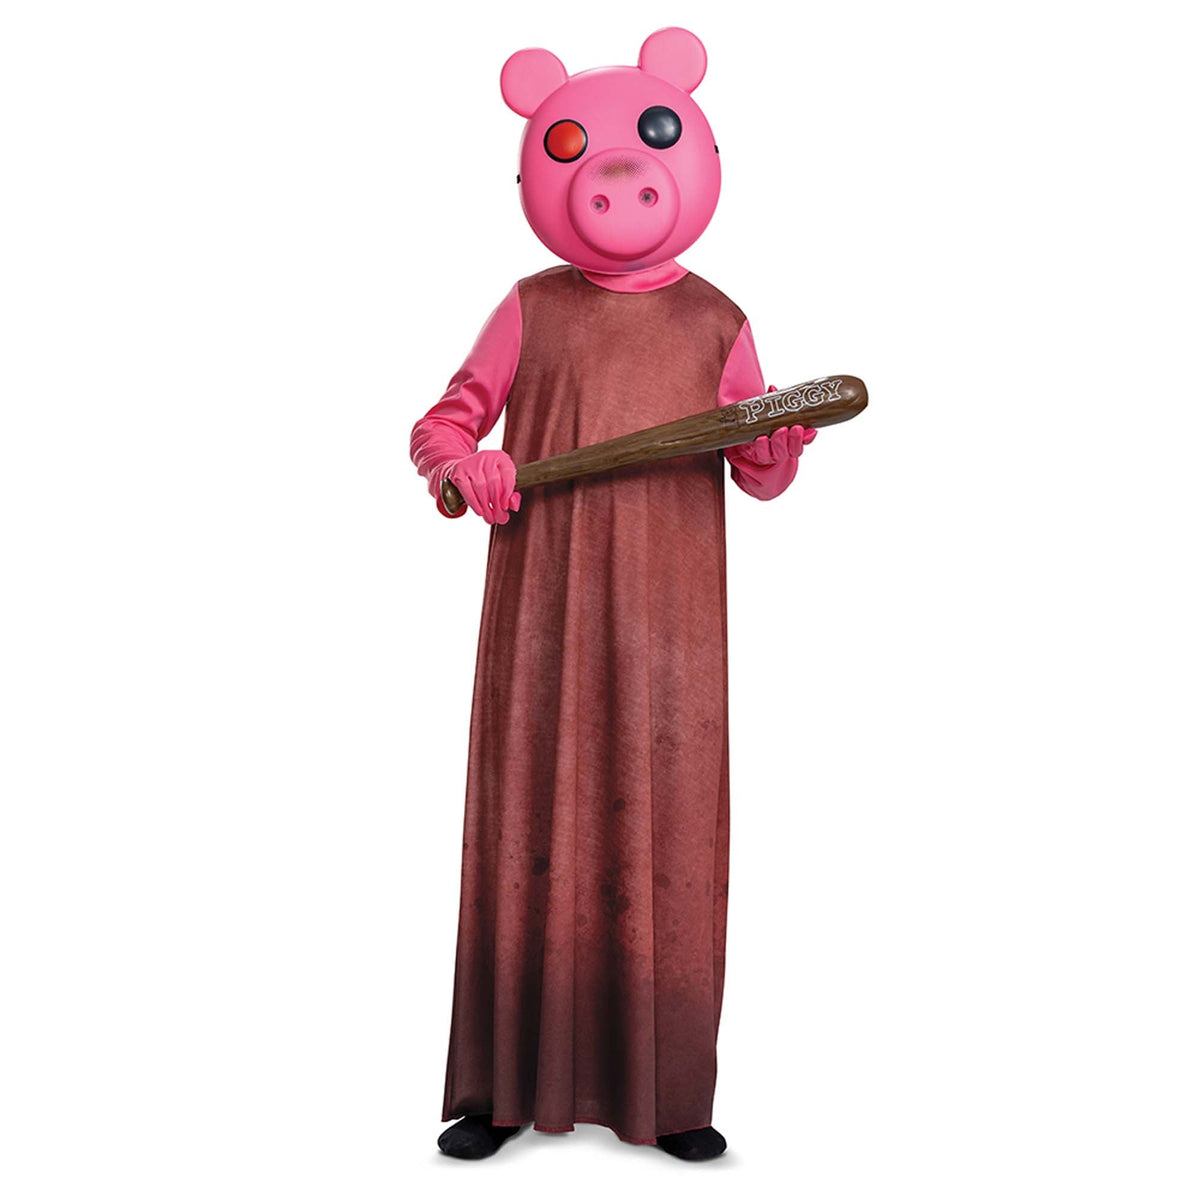 DISGUISE (TOY-SPORT) Costumes Piggy Classic Costume for Kids, Piggy, Pink Robe